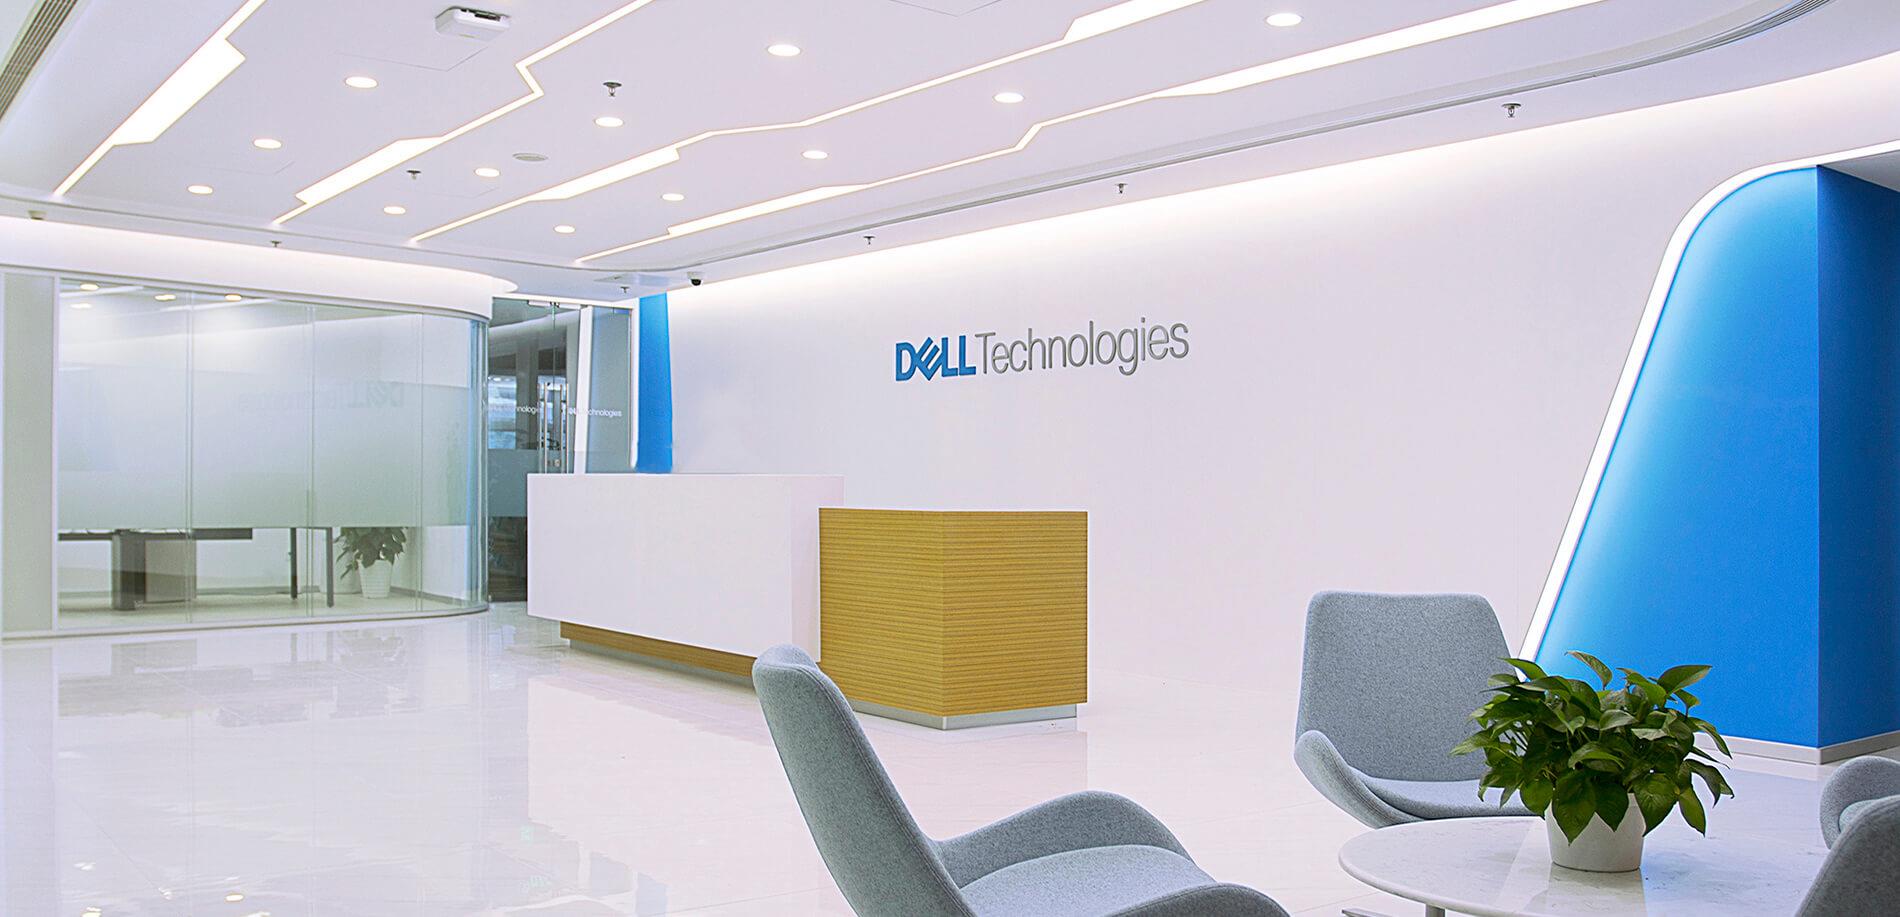 DELL Technologies BEIJING Office_PROJECTS_IDEAL DESIGN & CONSTRUCTION INC.